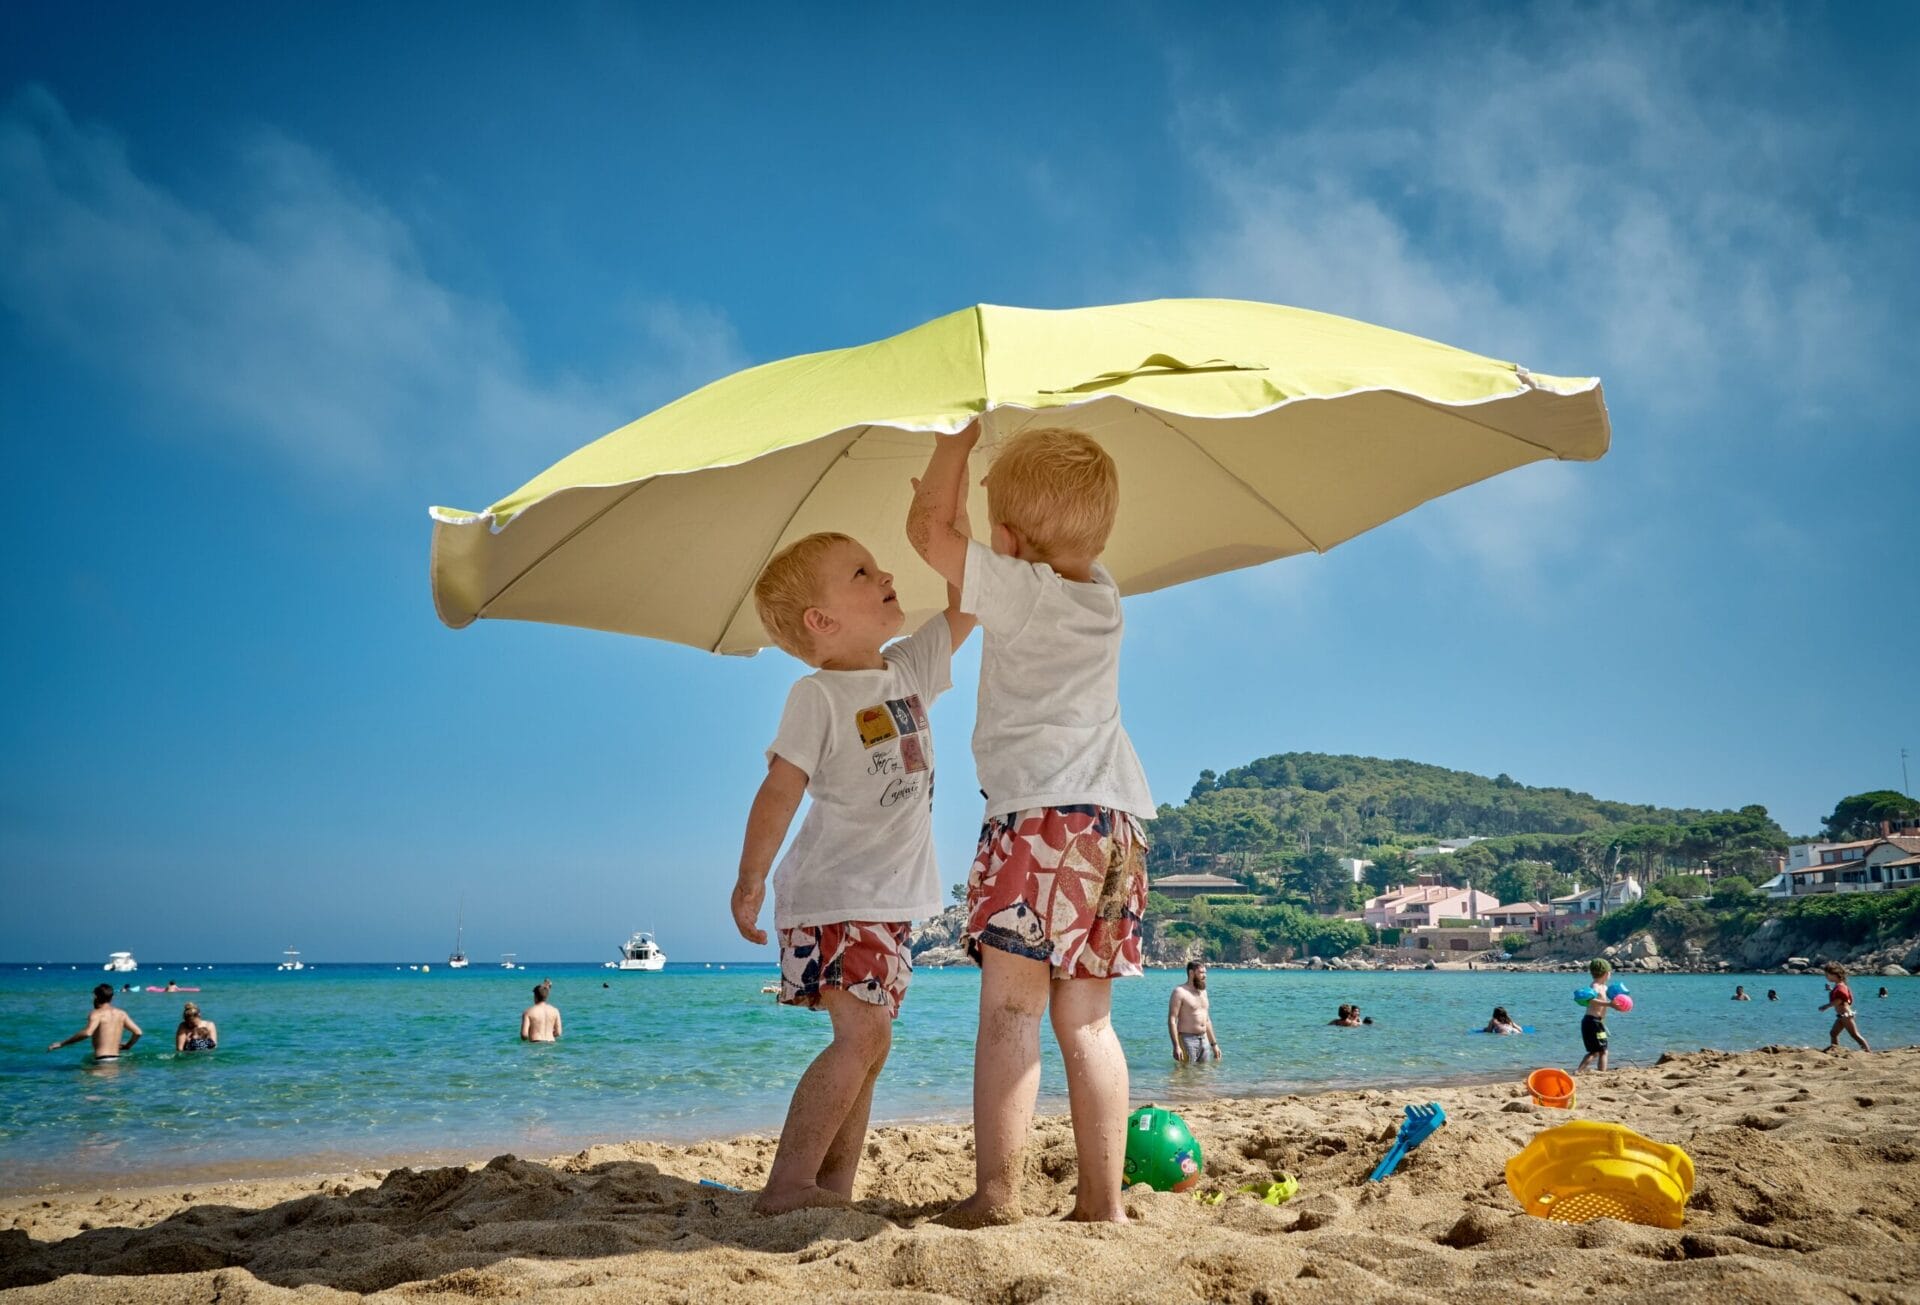 Two boys at the beach putting up an umbrella while families swim in the background